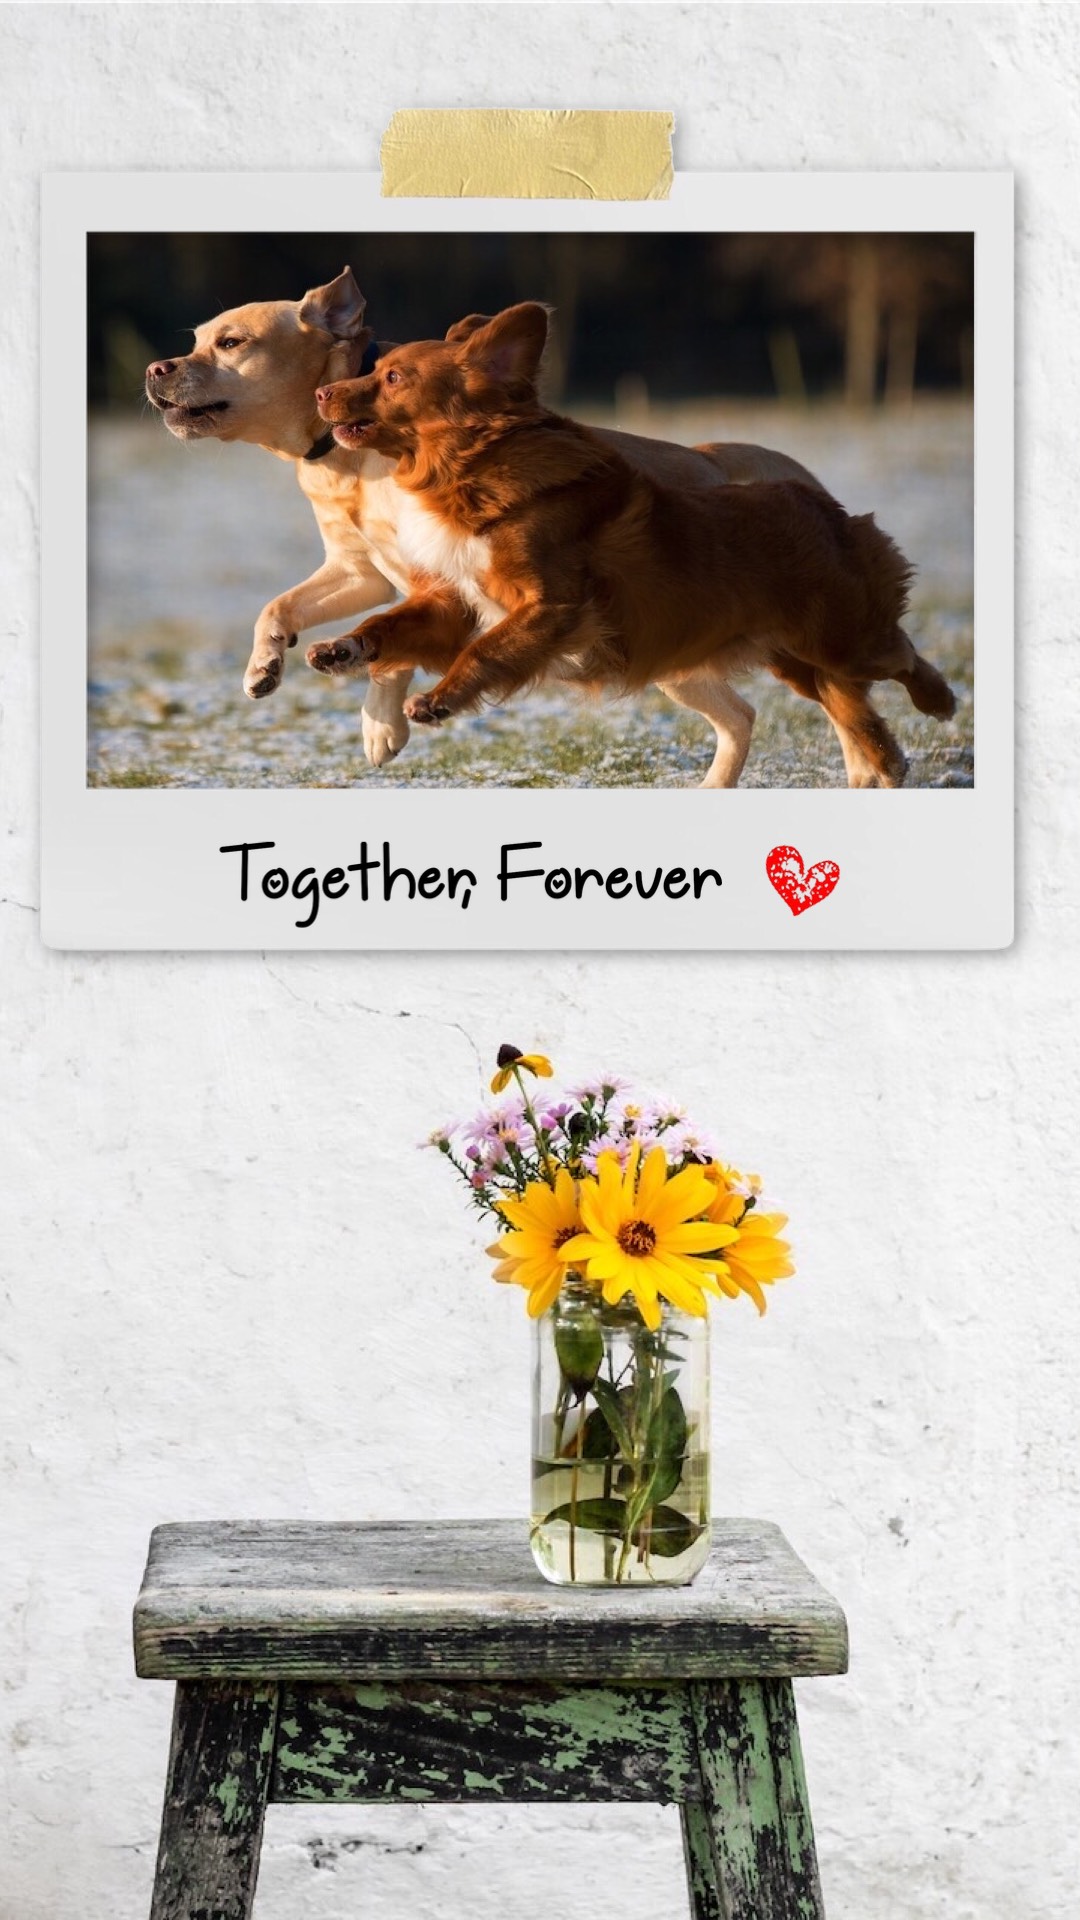 Together Forever. A Picture Of A Dog And A Vase Of Flowers Template